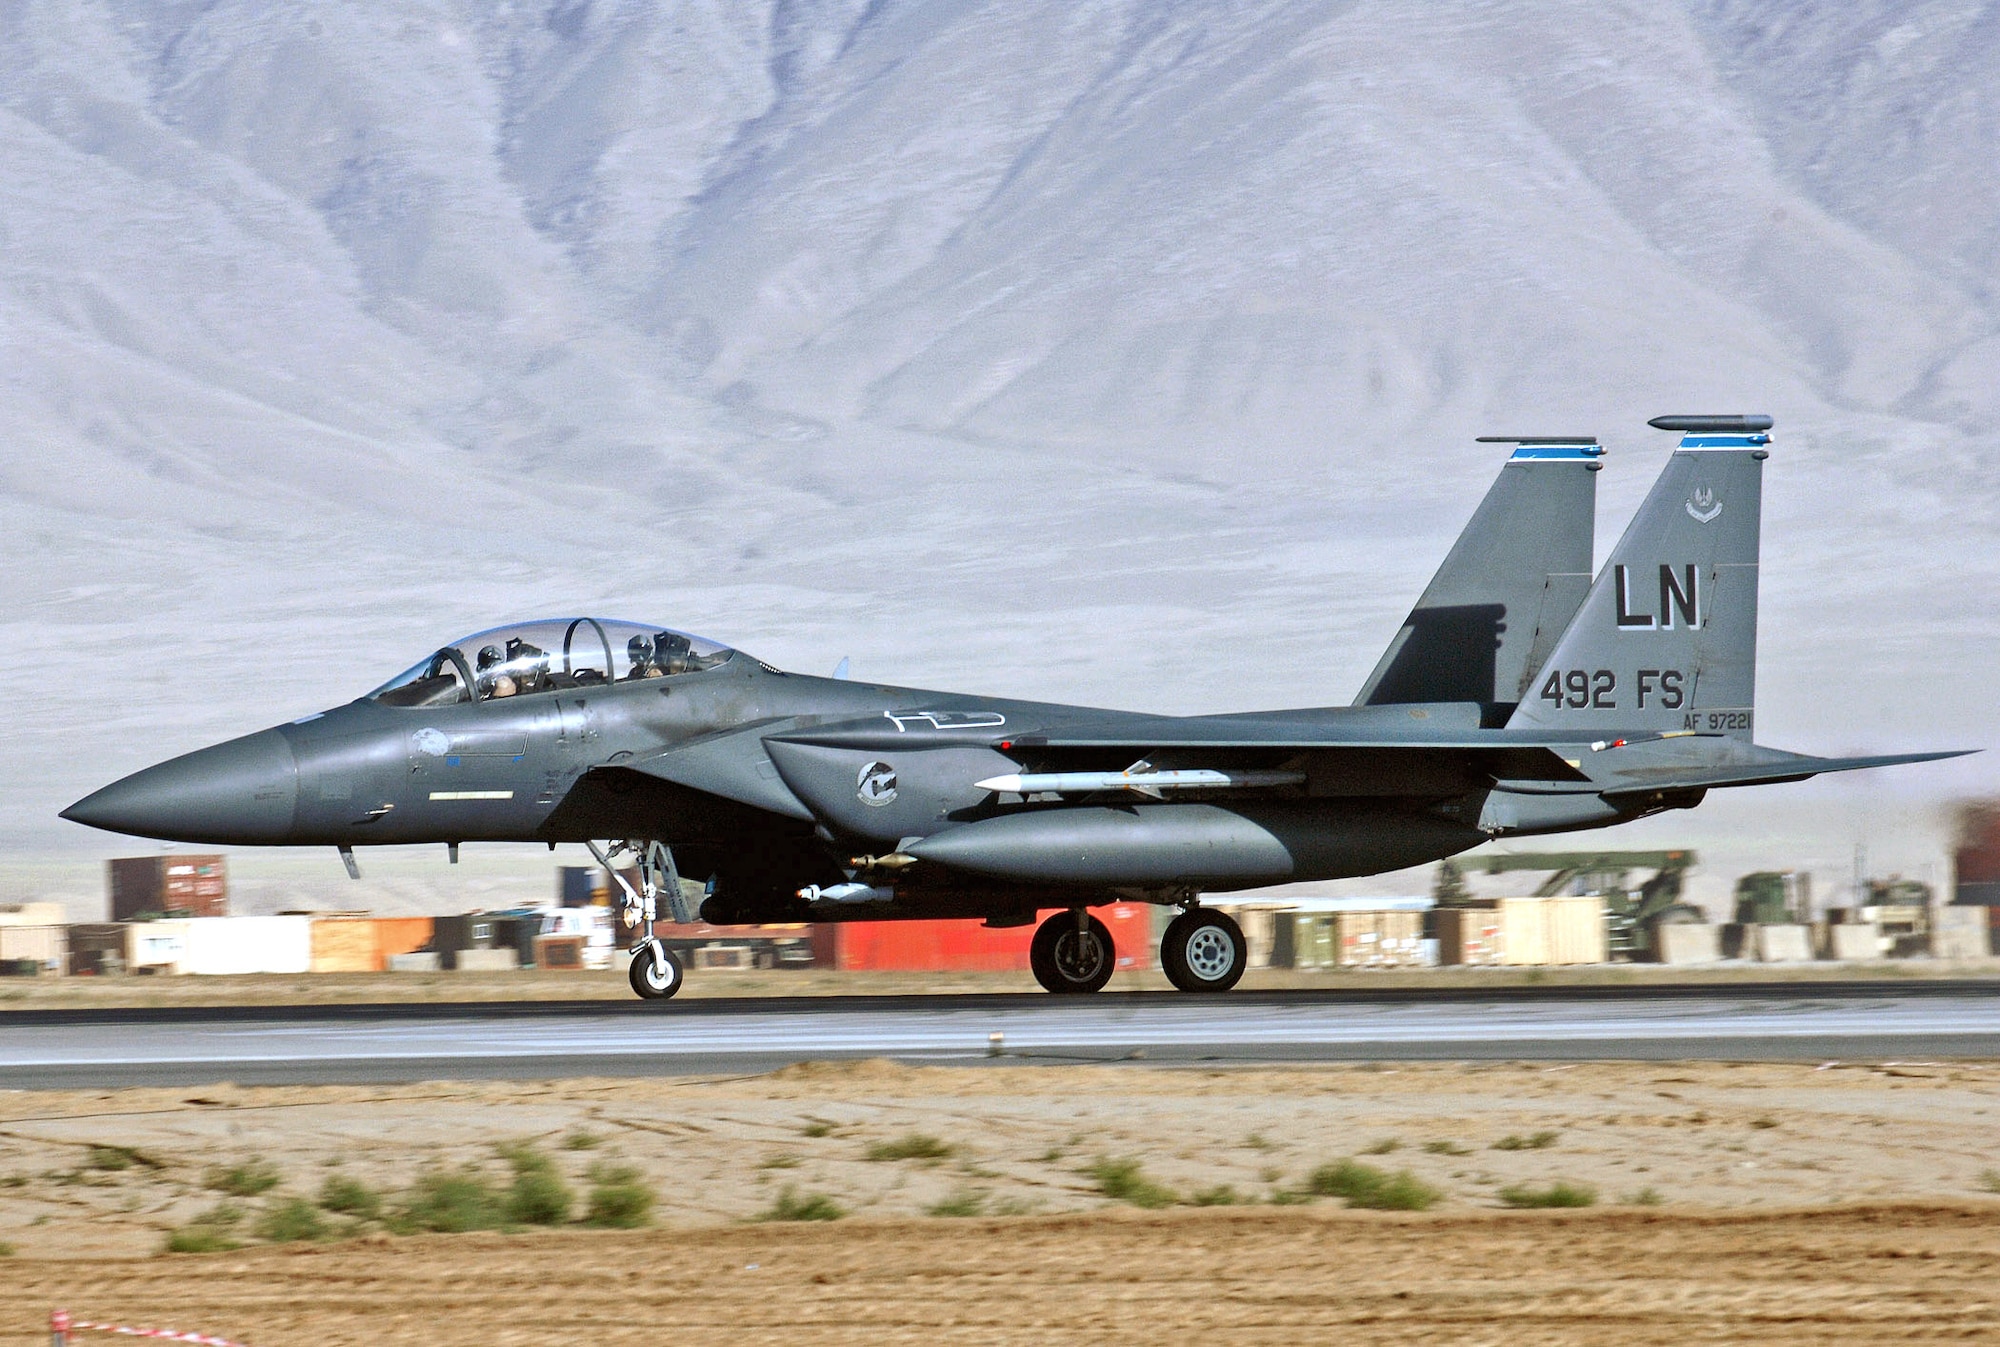 An F-15E Strike Eagle assigned to the 492nd Expeditionary Fighter Squadron takes off from Bagram Air Base, Afghanistan. The 492nd EFS is deployed from Royal Air Force Lakenheath, England. F-15Es fly close-air-support missions for Operation Enduring Freedom and contributed to 37 coalition sorties over Afghanistan Aug. 1. (Air Force photo/Staff Sgt. Craig Seals) 